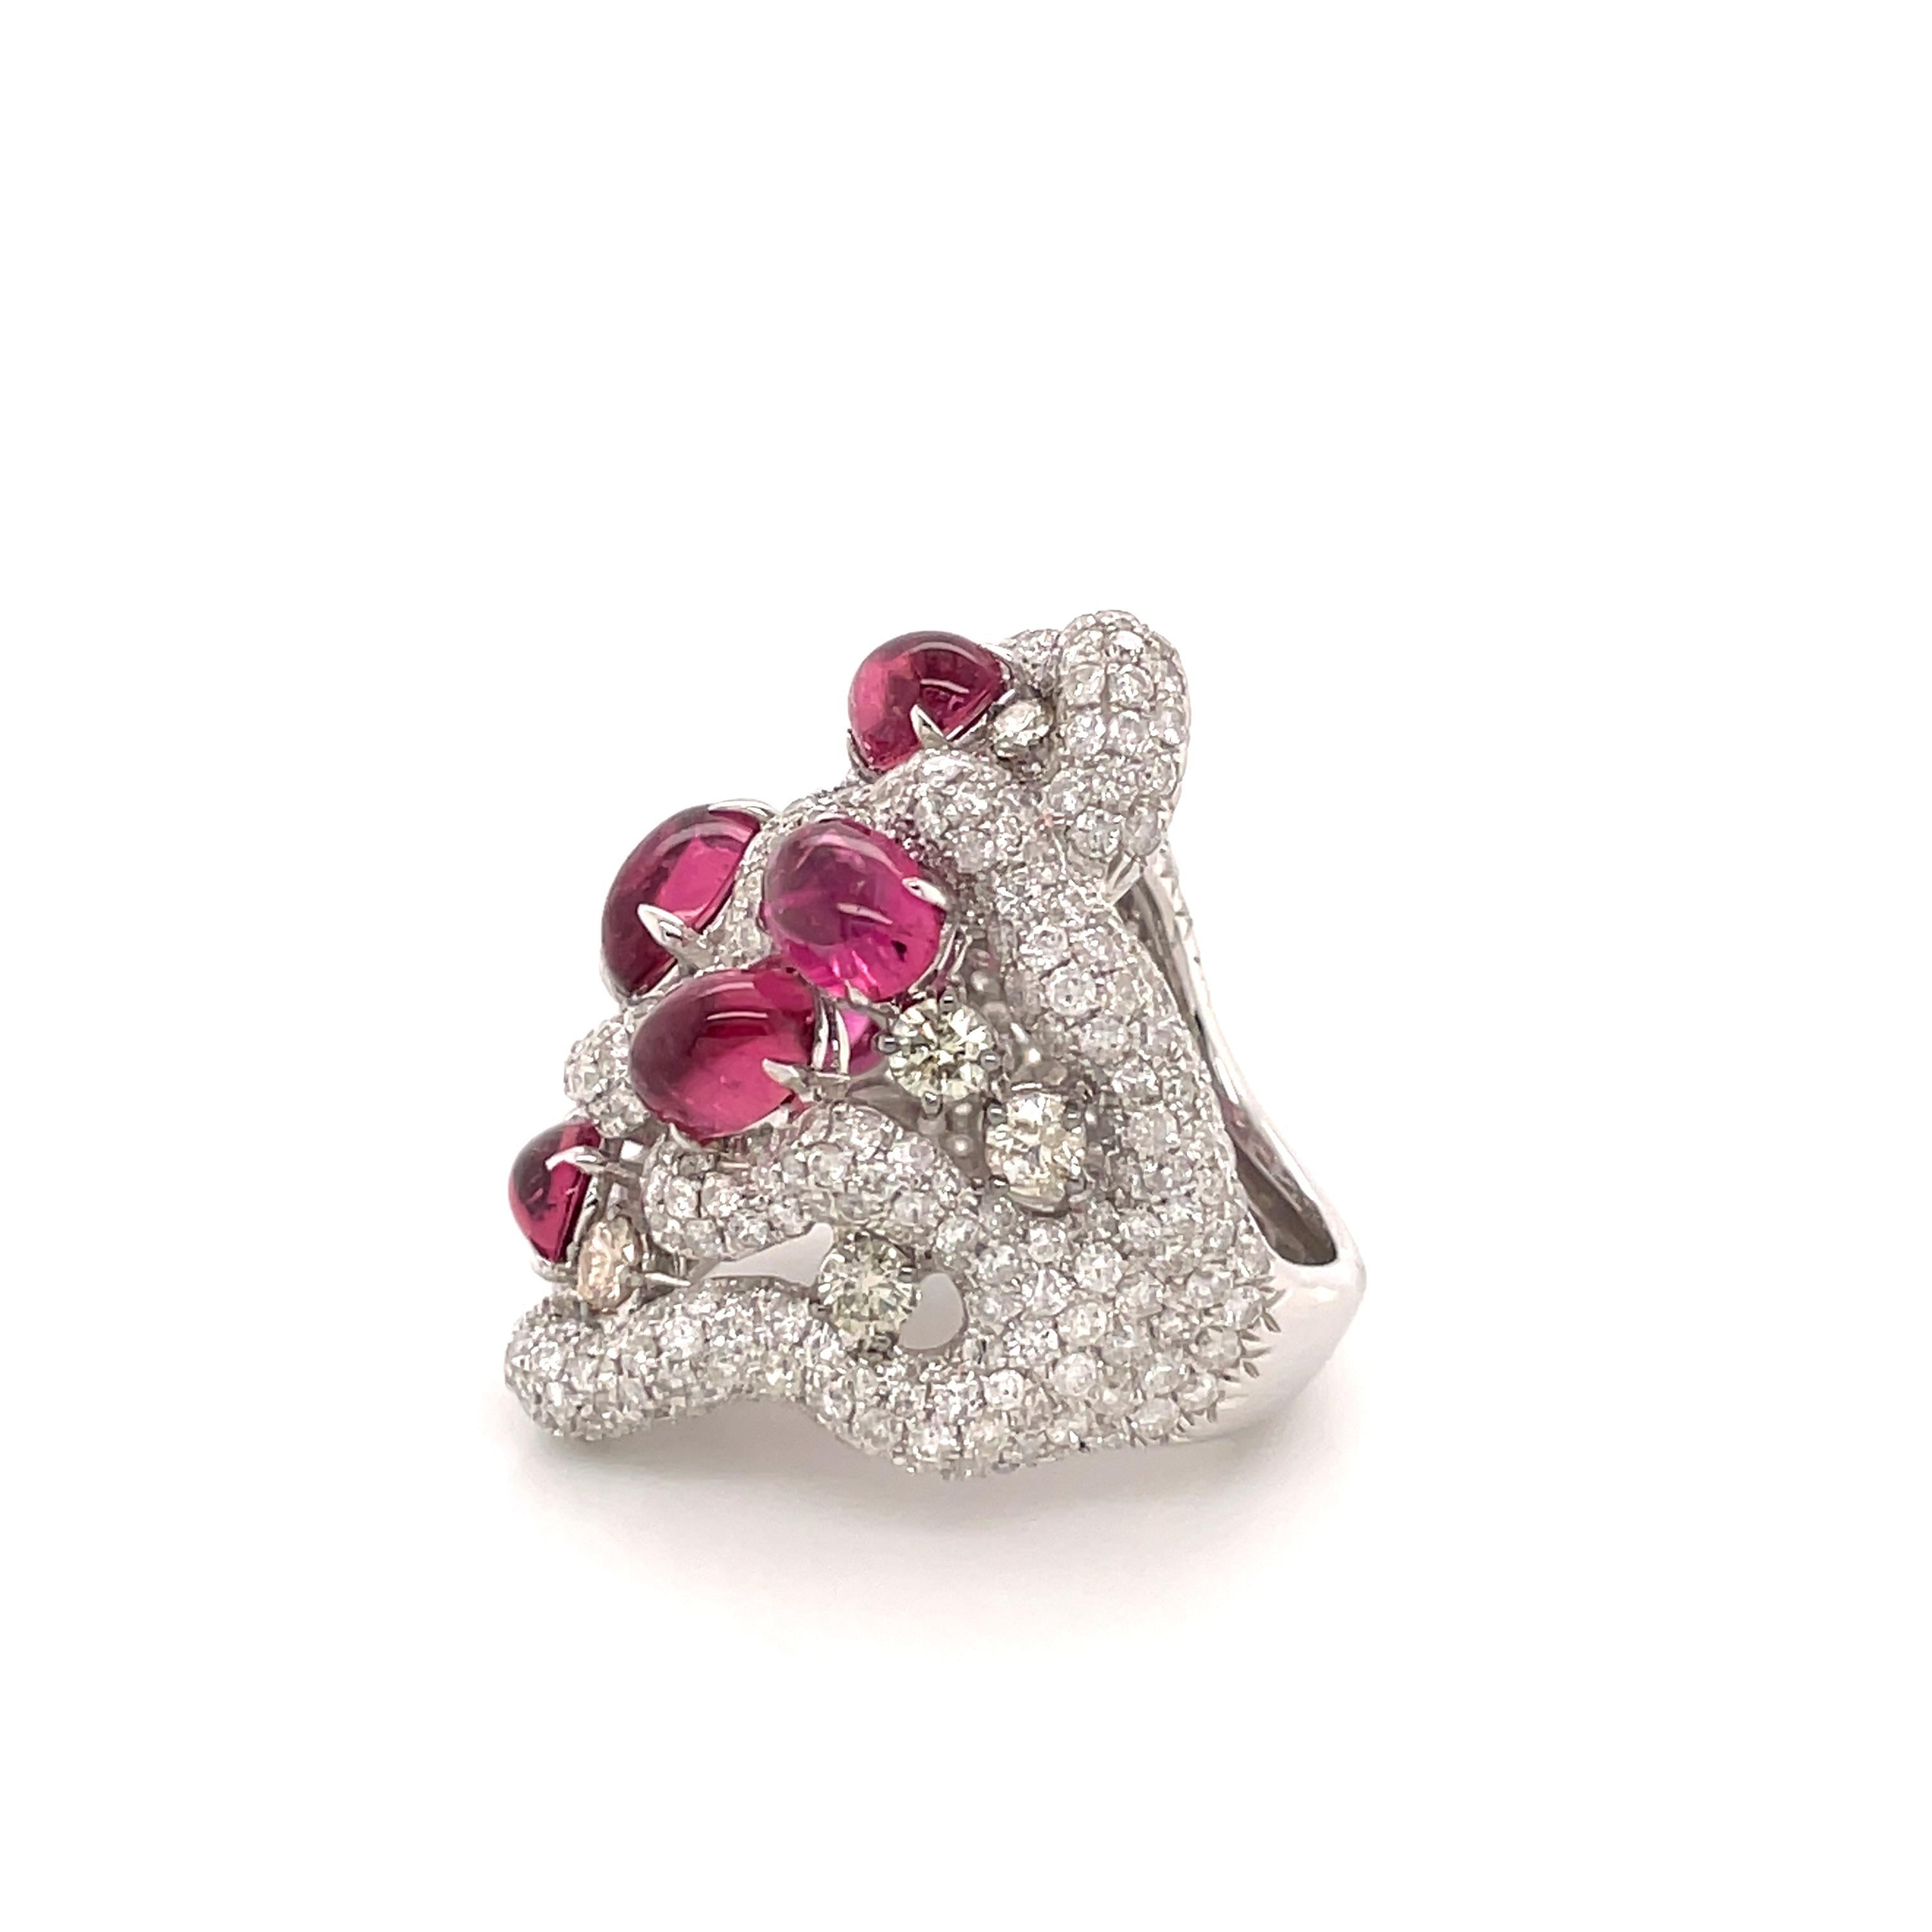 The Rubellites Entangled Diamond Multi Rope Ring is a striking work of art that seamlessly combines elegance with a touch of avant-garde design. At the heart of the ring, a lustrous rubellite gemstone takes centre stage, radiating a deep and